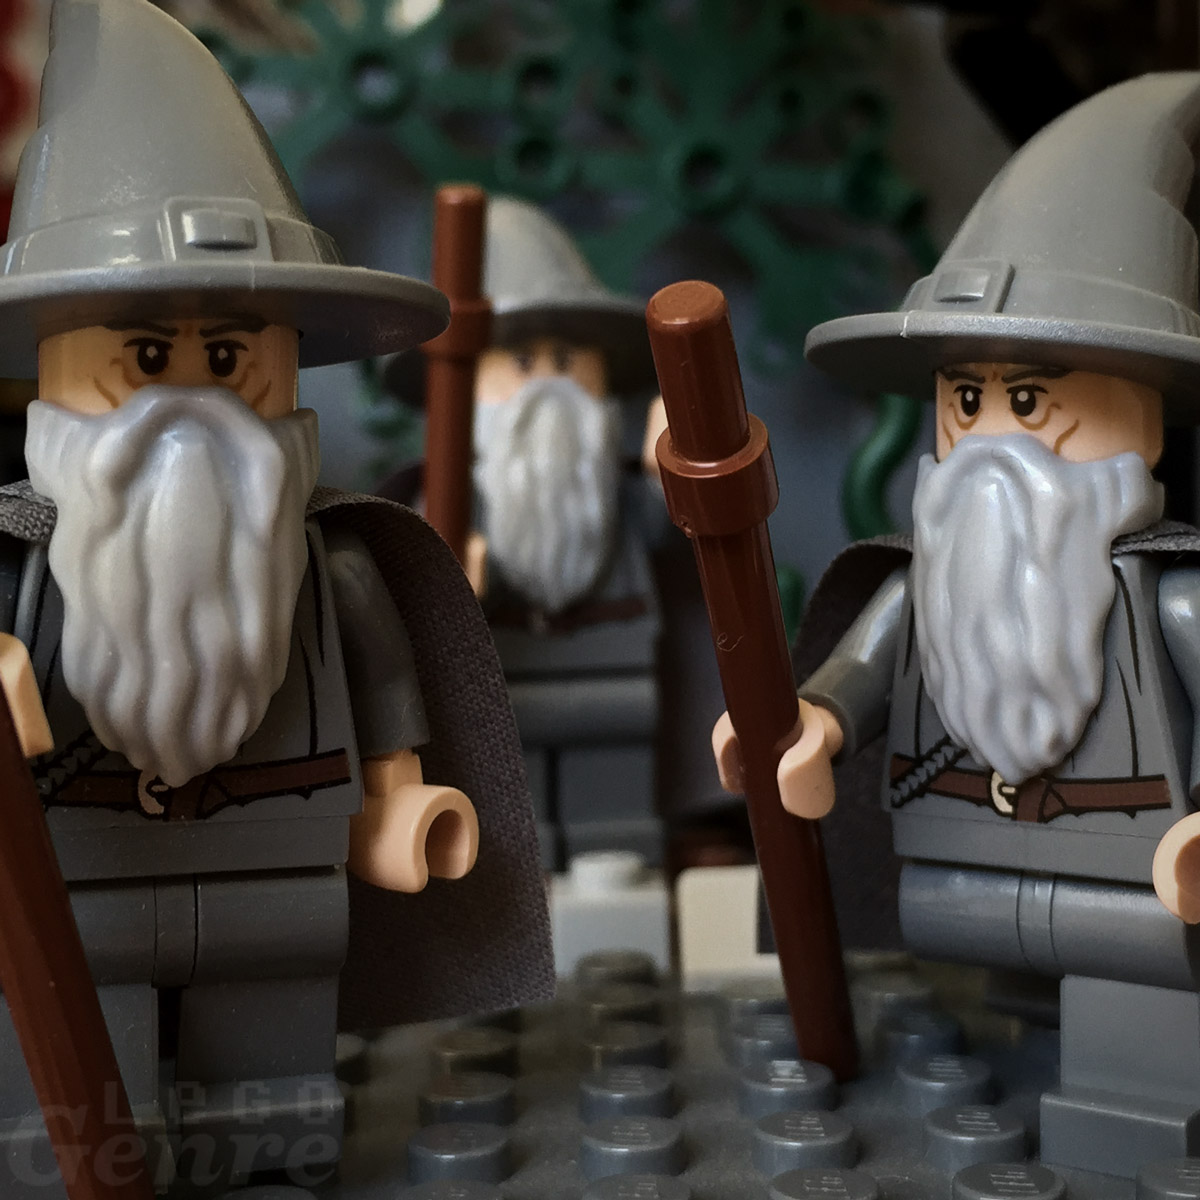 Custom WIZARD Accessory PACK for Lego Minifigures LOTR Gandalf Pick Color! 